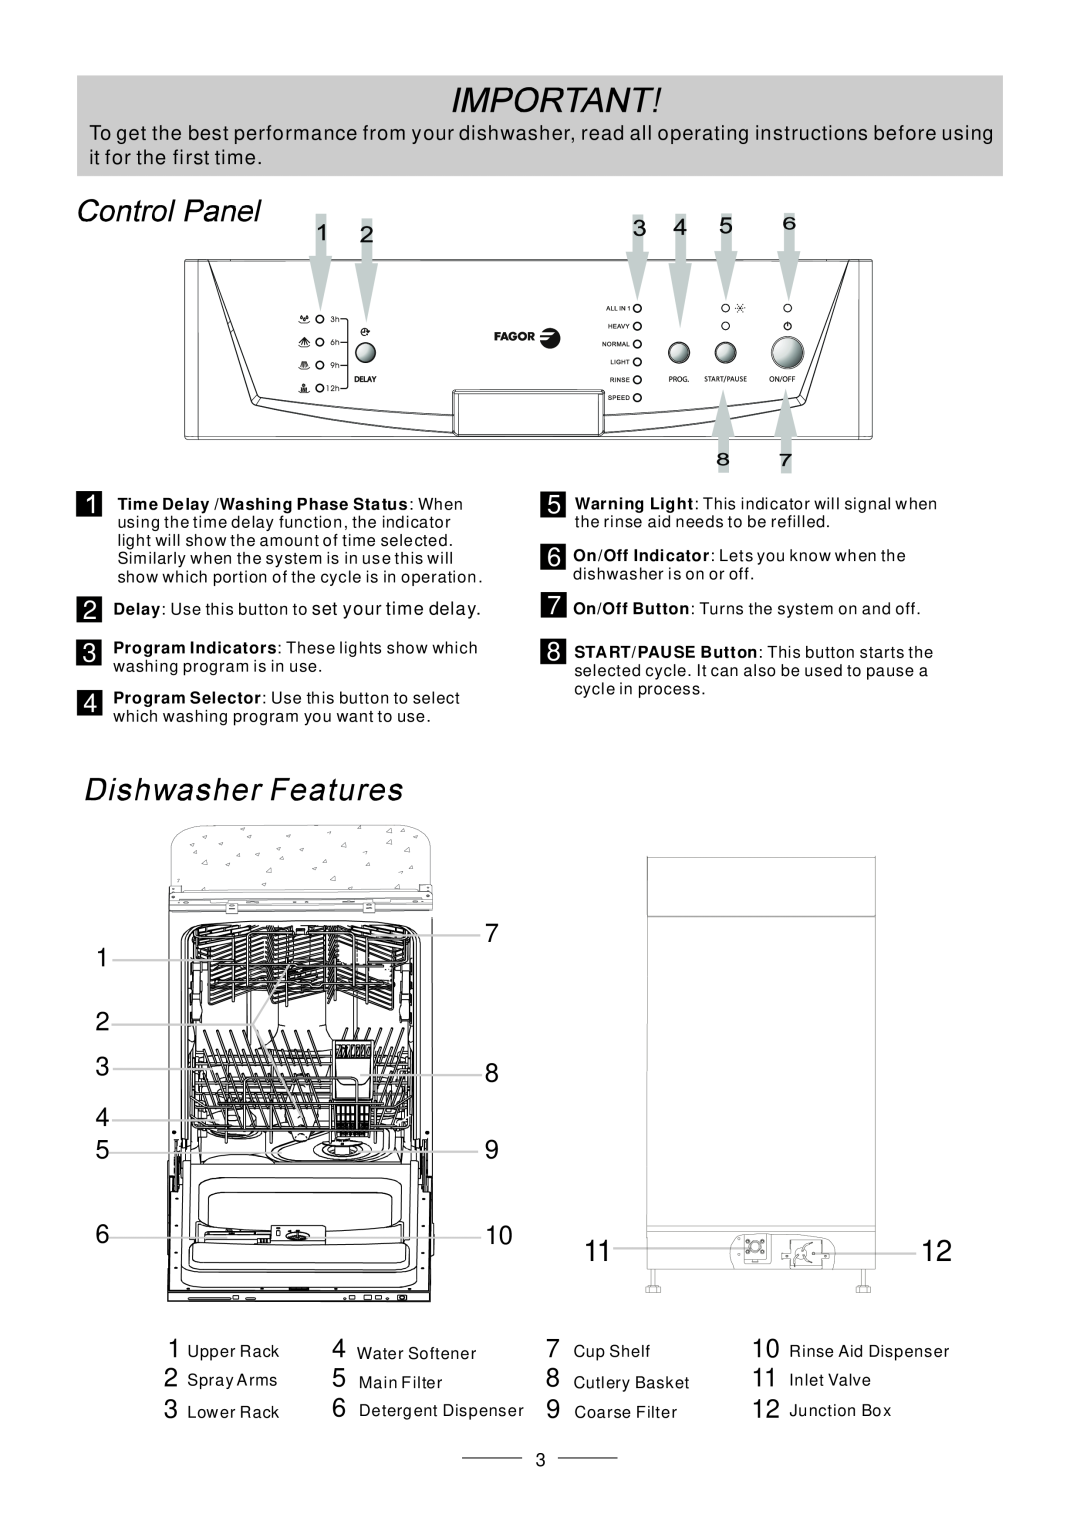 Fagor America LFA-45X instruction manual On/Off Indicator Lets you know when the dishwasher is on or off 